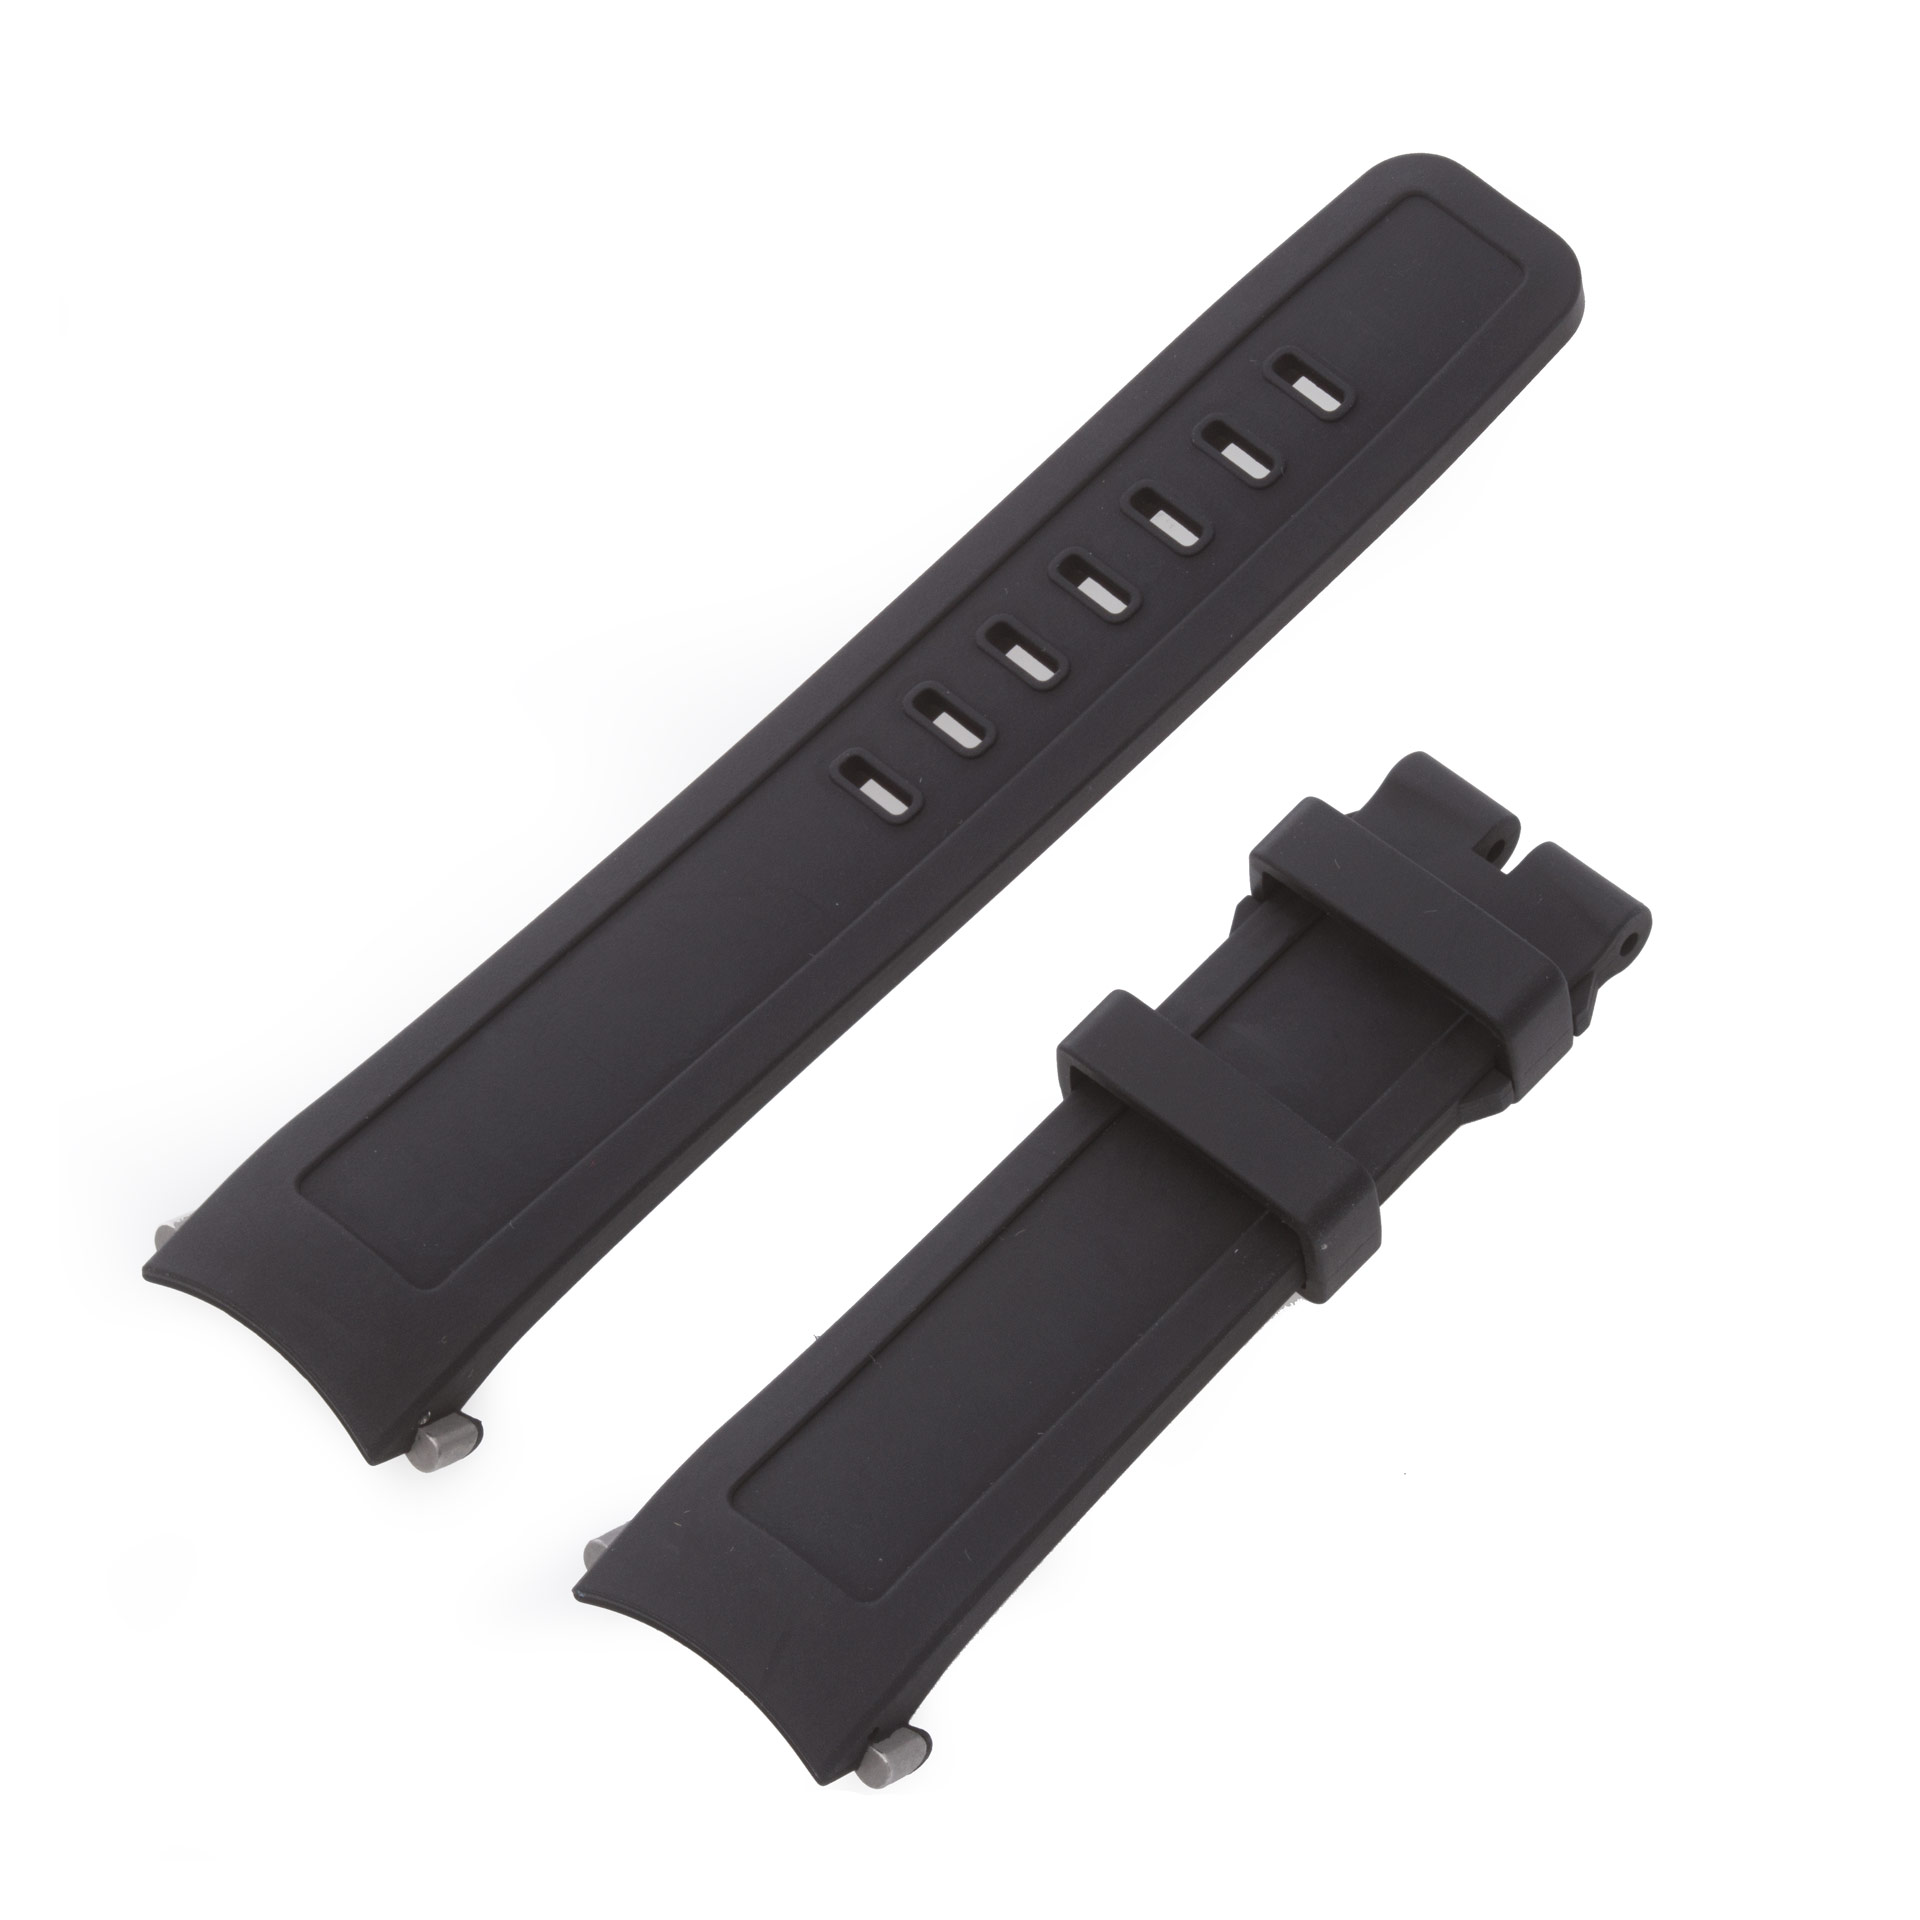 IWC black rubber strap for tang buckle. 22mm x 20mm